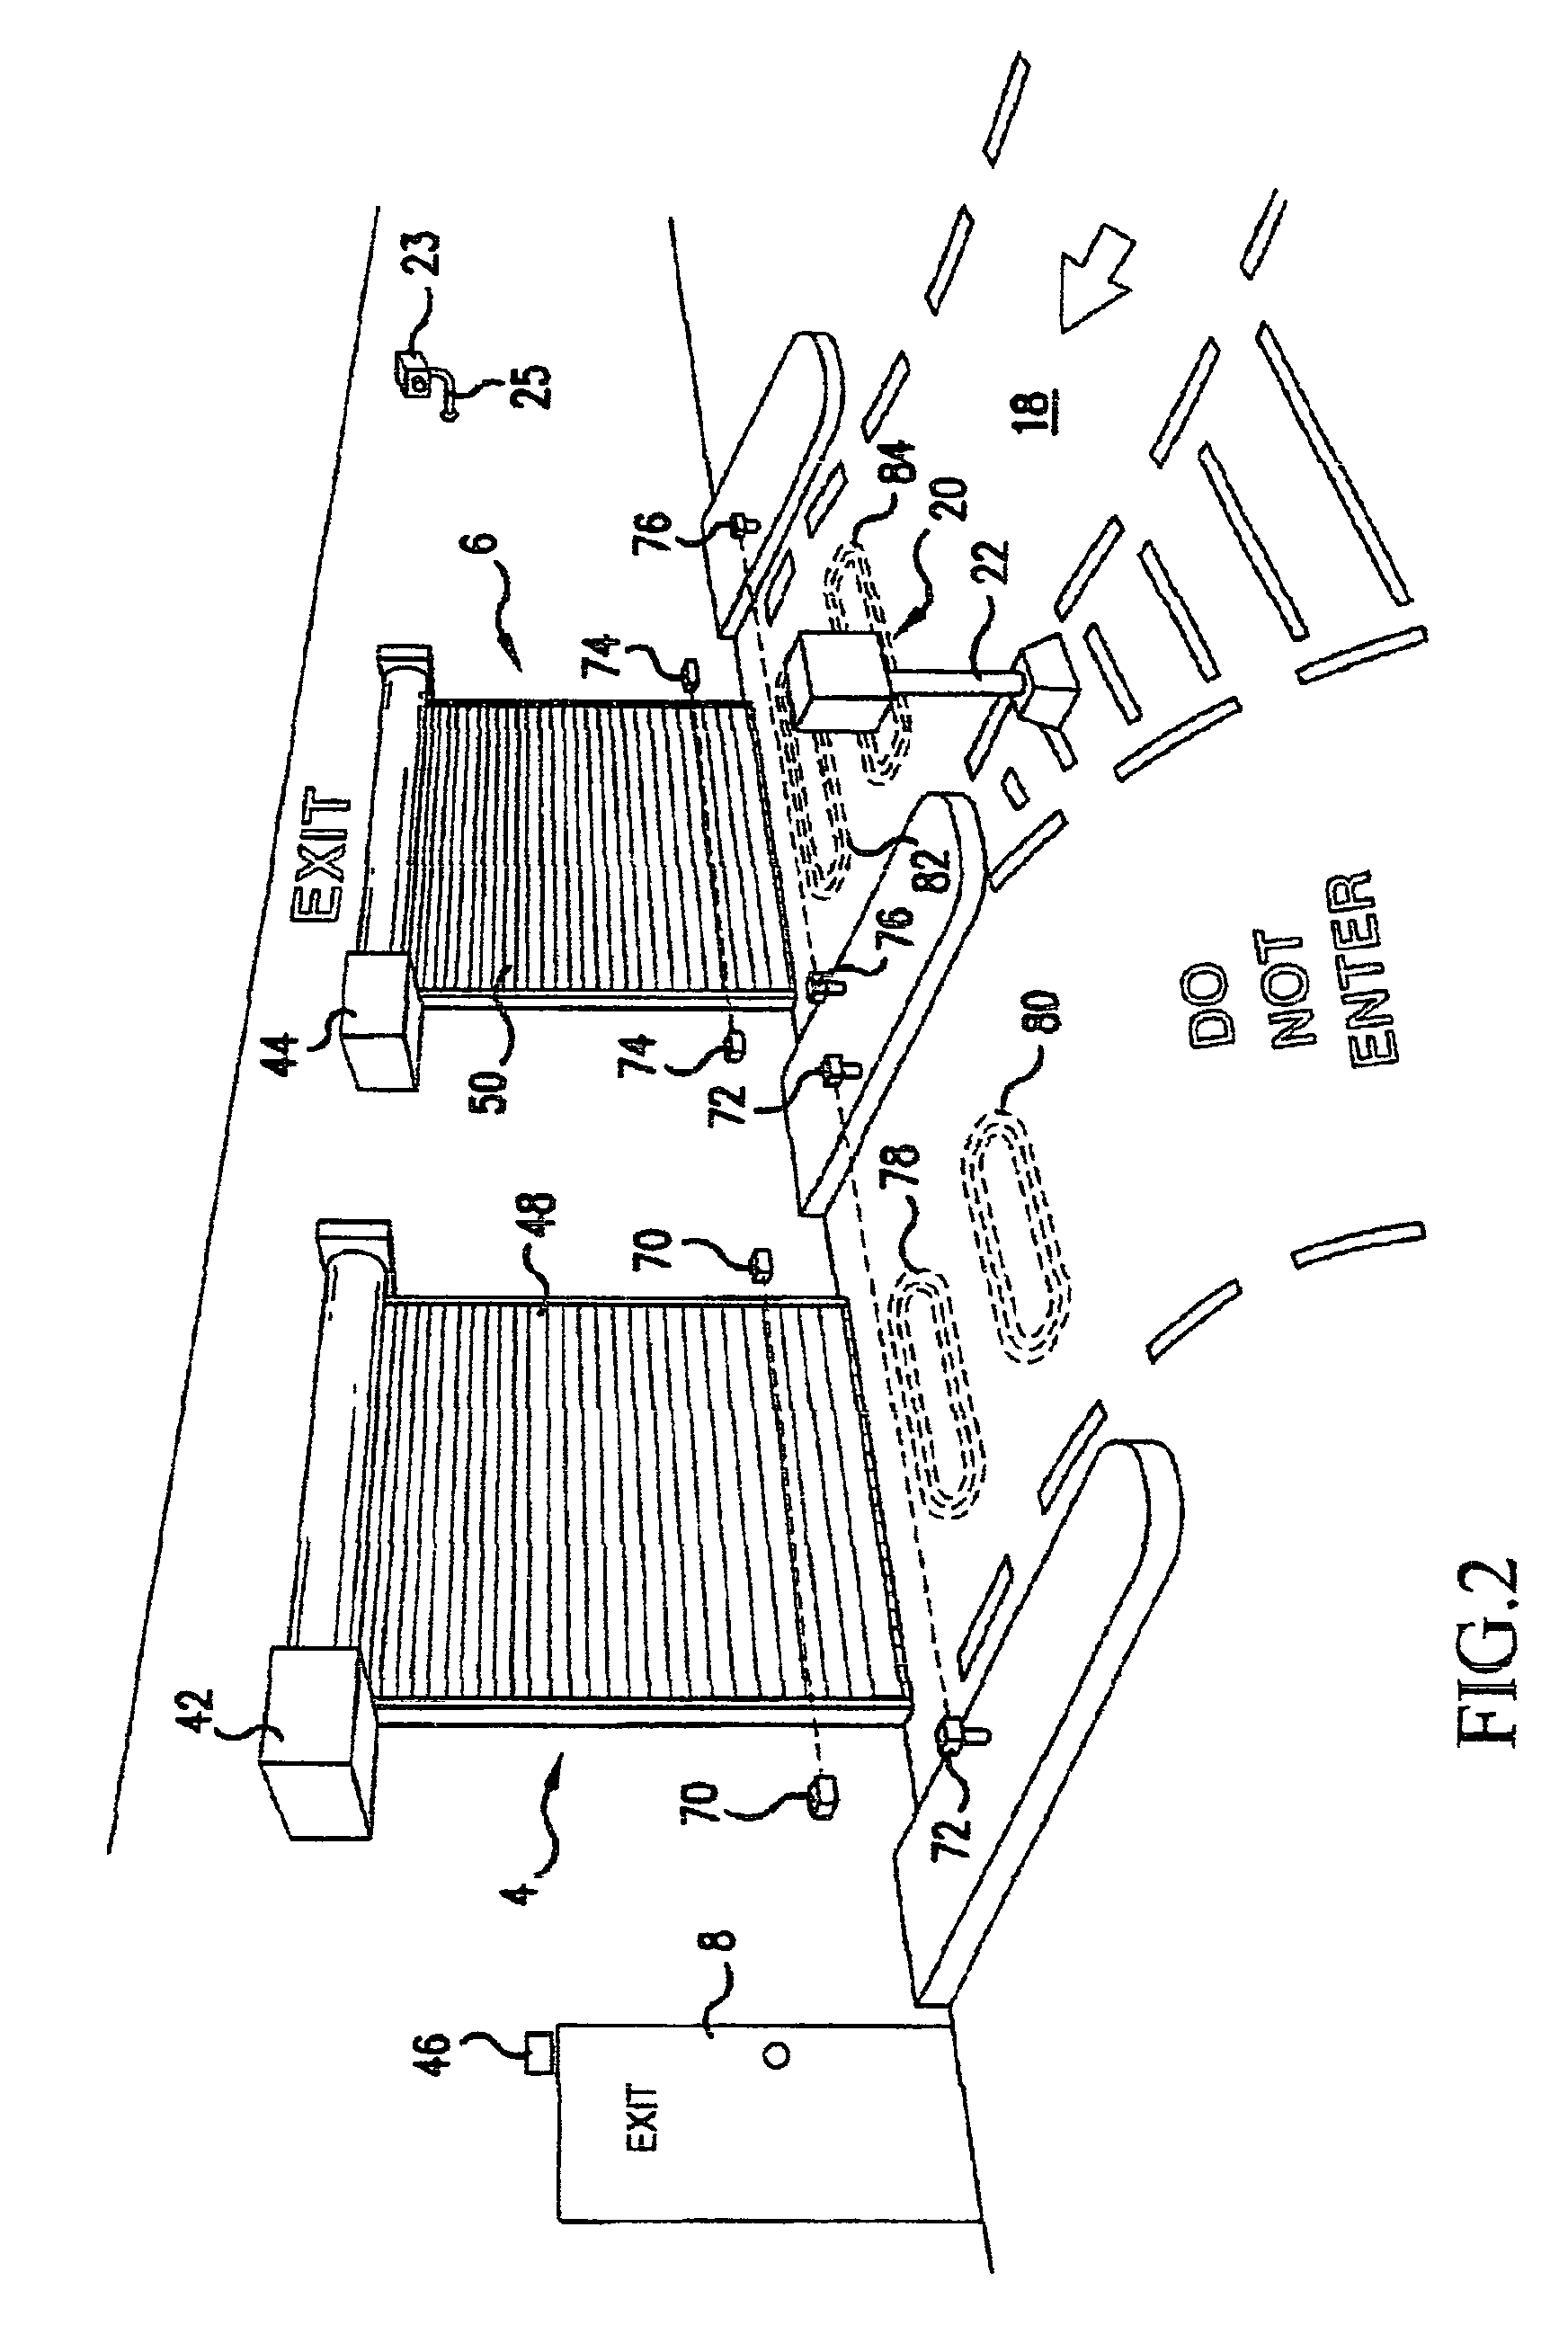 Management and control system for a designated functional space having at least one portal